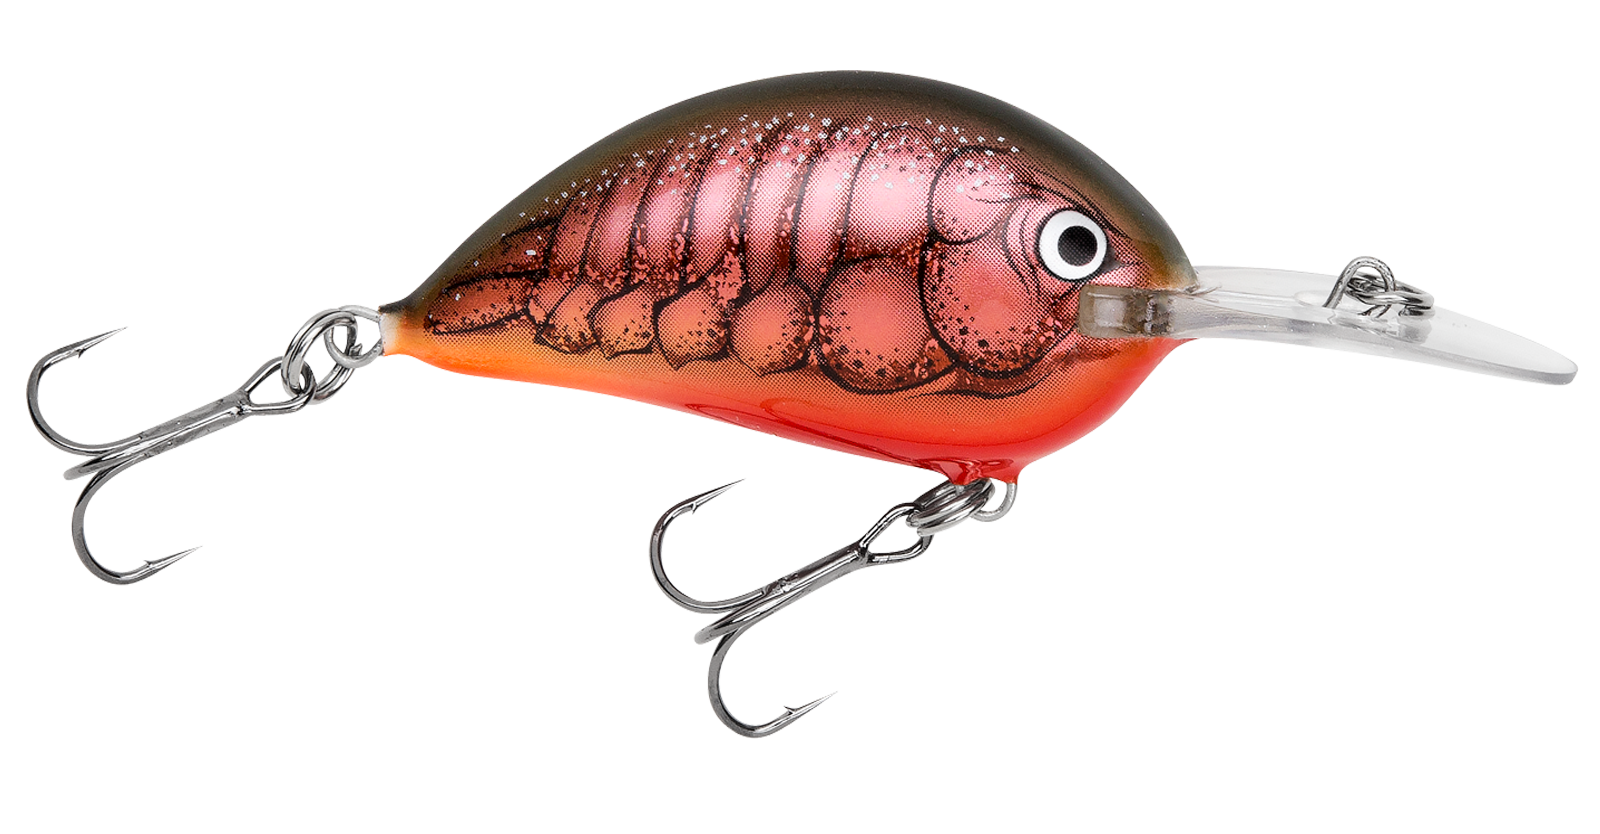 <b>Bagley</b><br>	Sunny B<br>	Bagley is adding the Sunny B to its line of balsa and hard-plastic lures. Made with Bagley's heat compression molding process, the Sunny B is 2 inches long and comes in a 3/8-ounce model. Comes in two lip variations for shallow or deep cranking and 13 bass-attracting colors. 